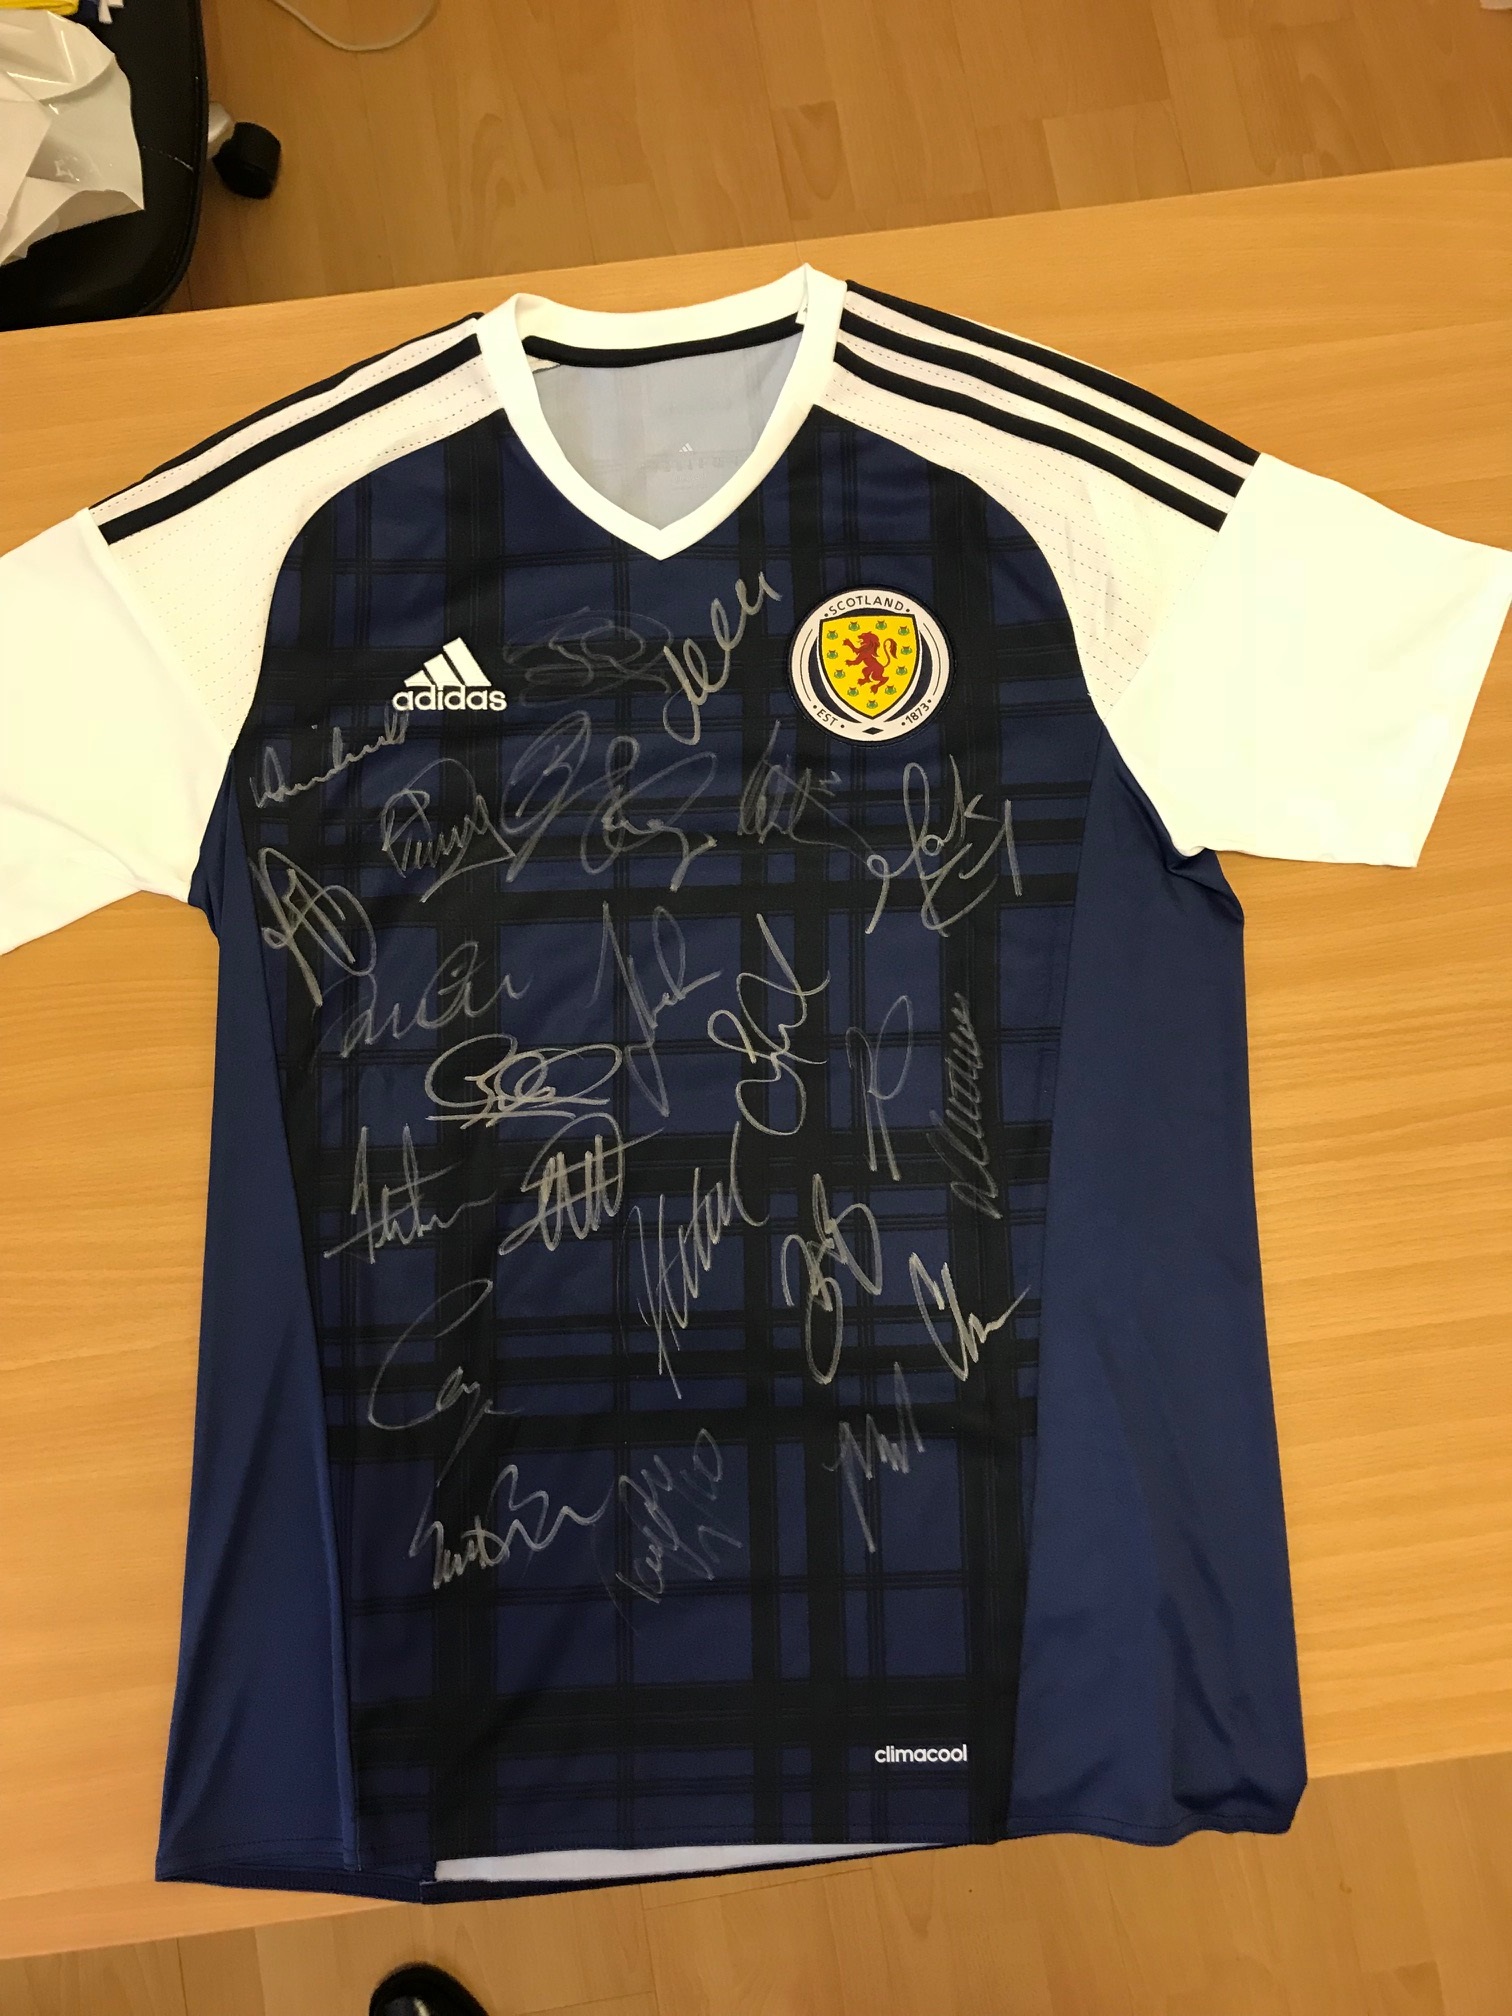 SIGNED SCOTLAND STRIP (HOME, SIGNED AFTER TO SLOVAKIA).